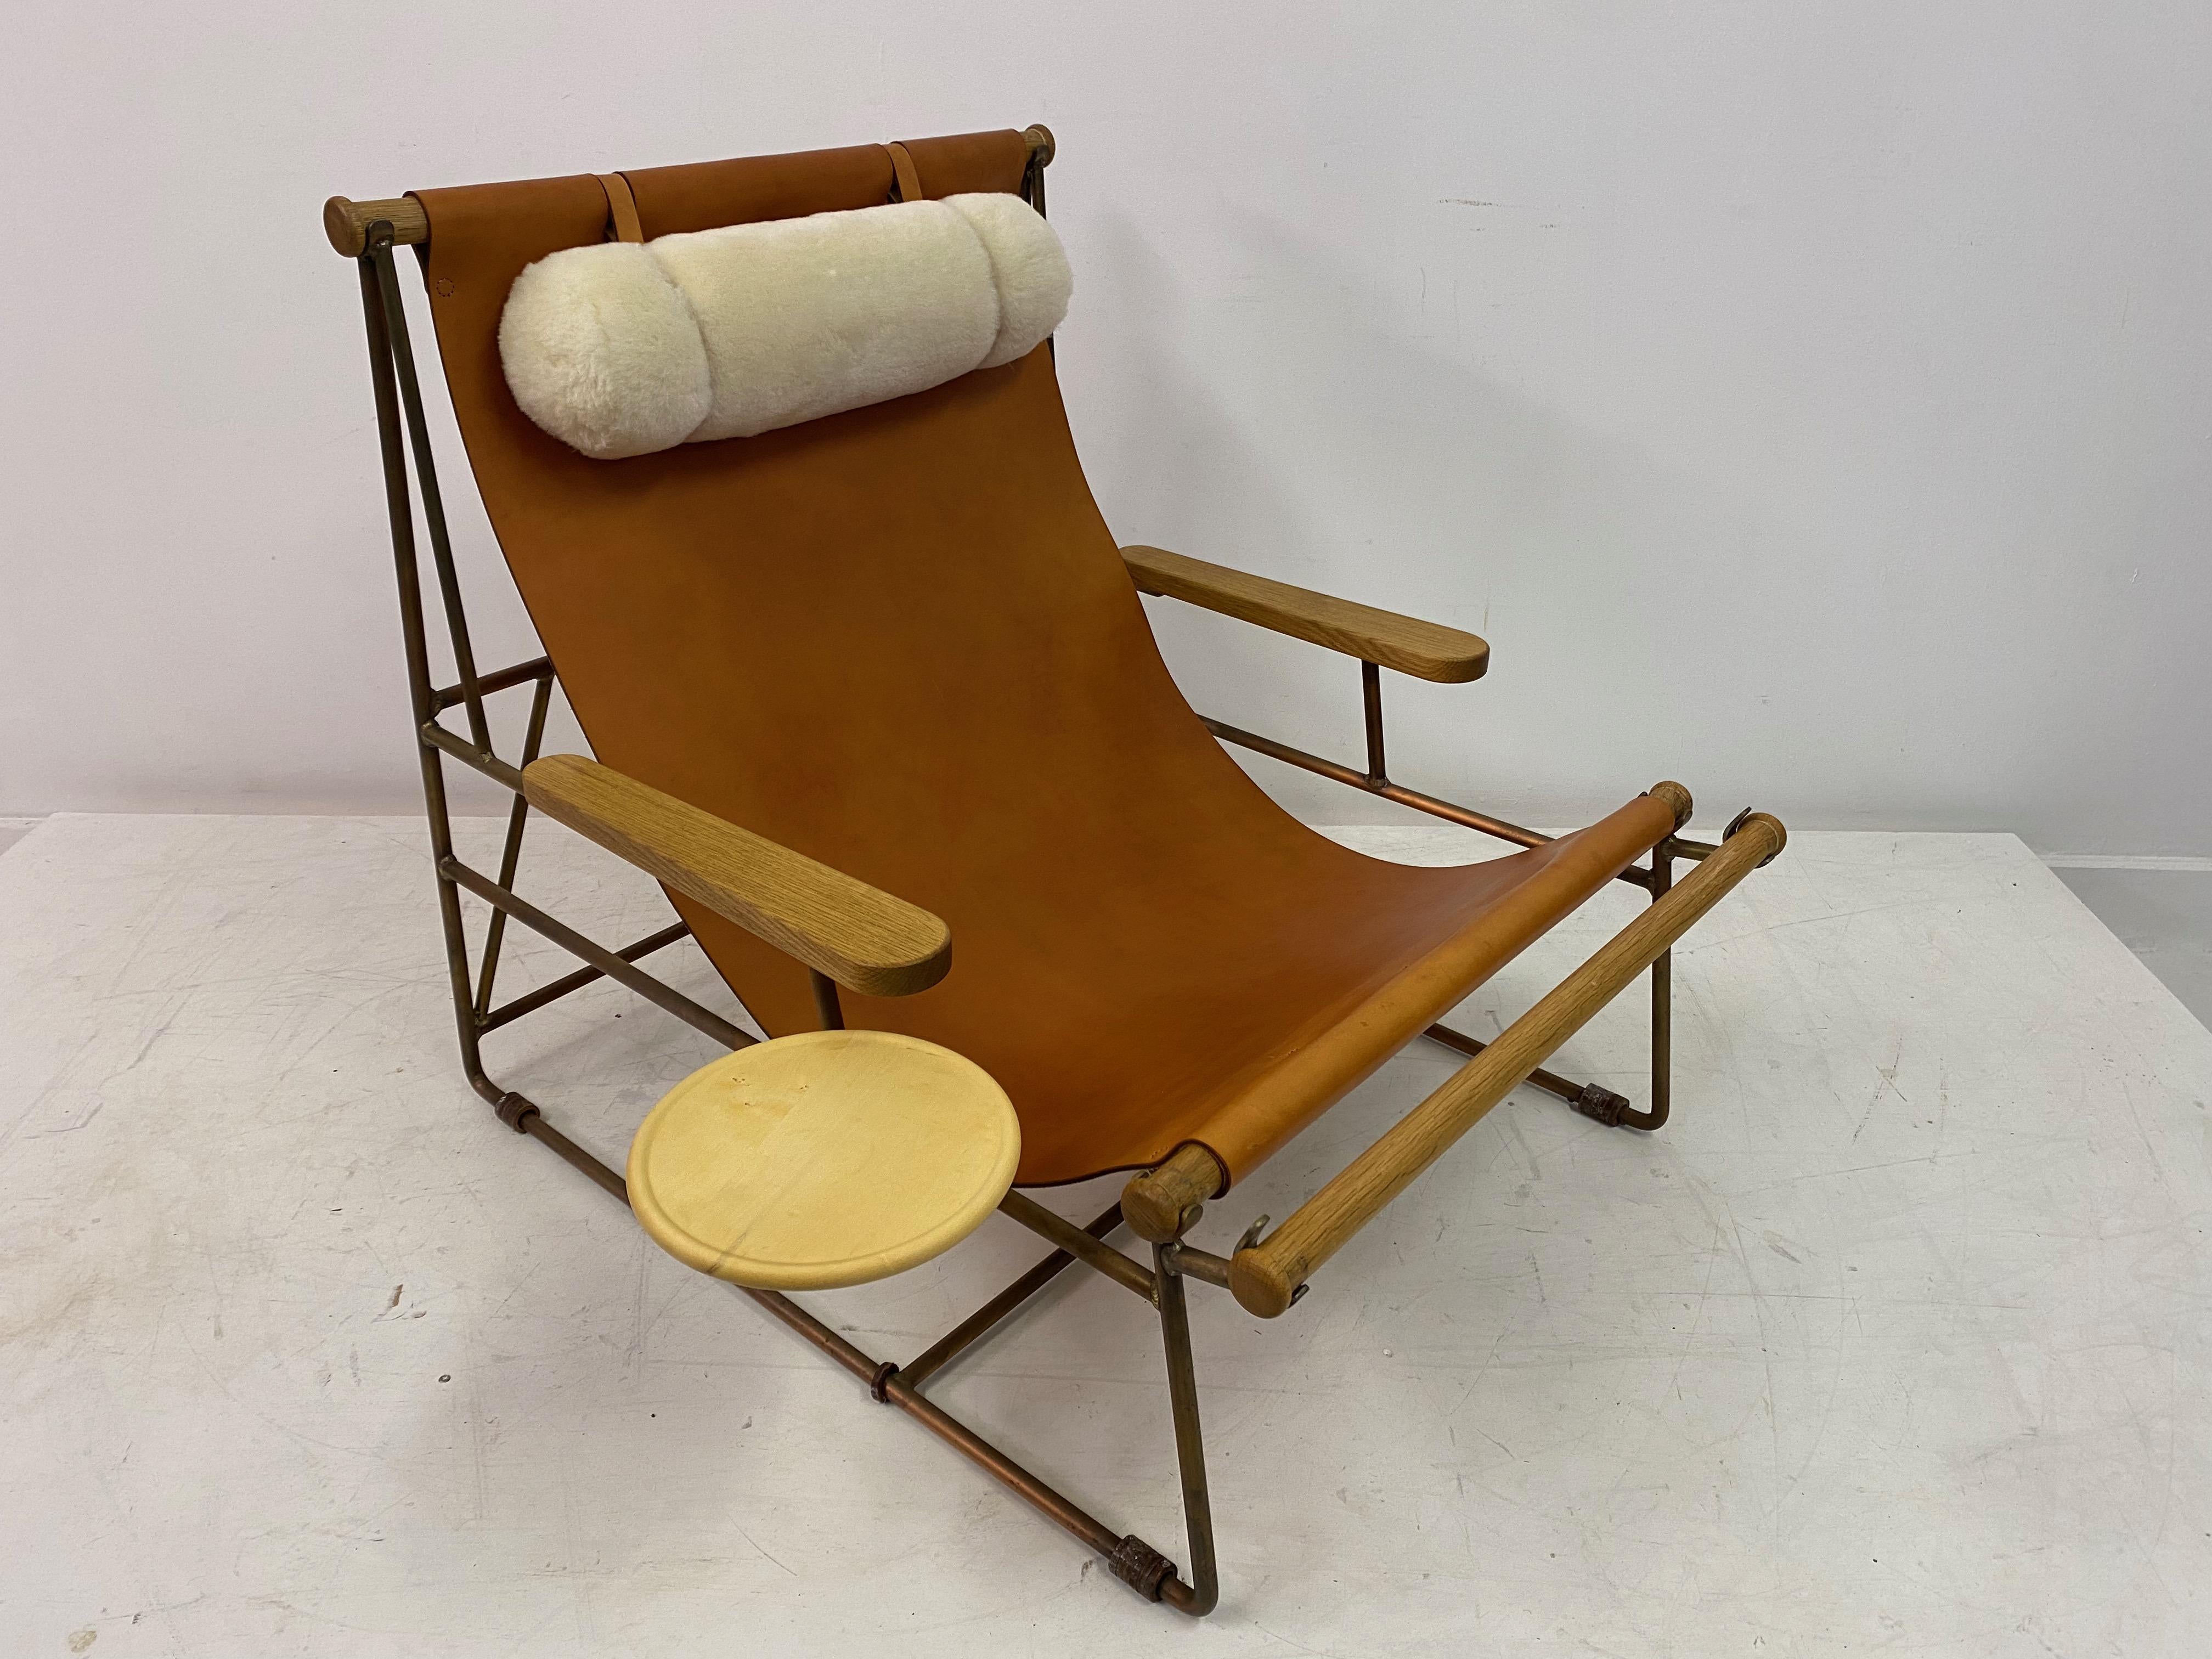 Leather Deck Lounge Chair by Tyler Hays for BDDW 9